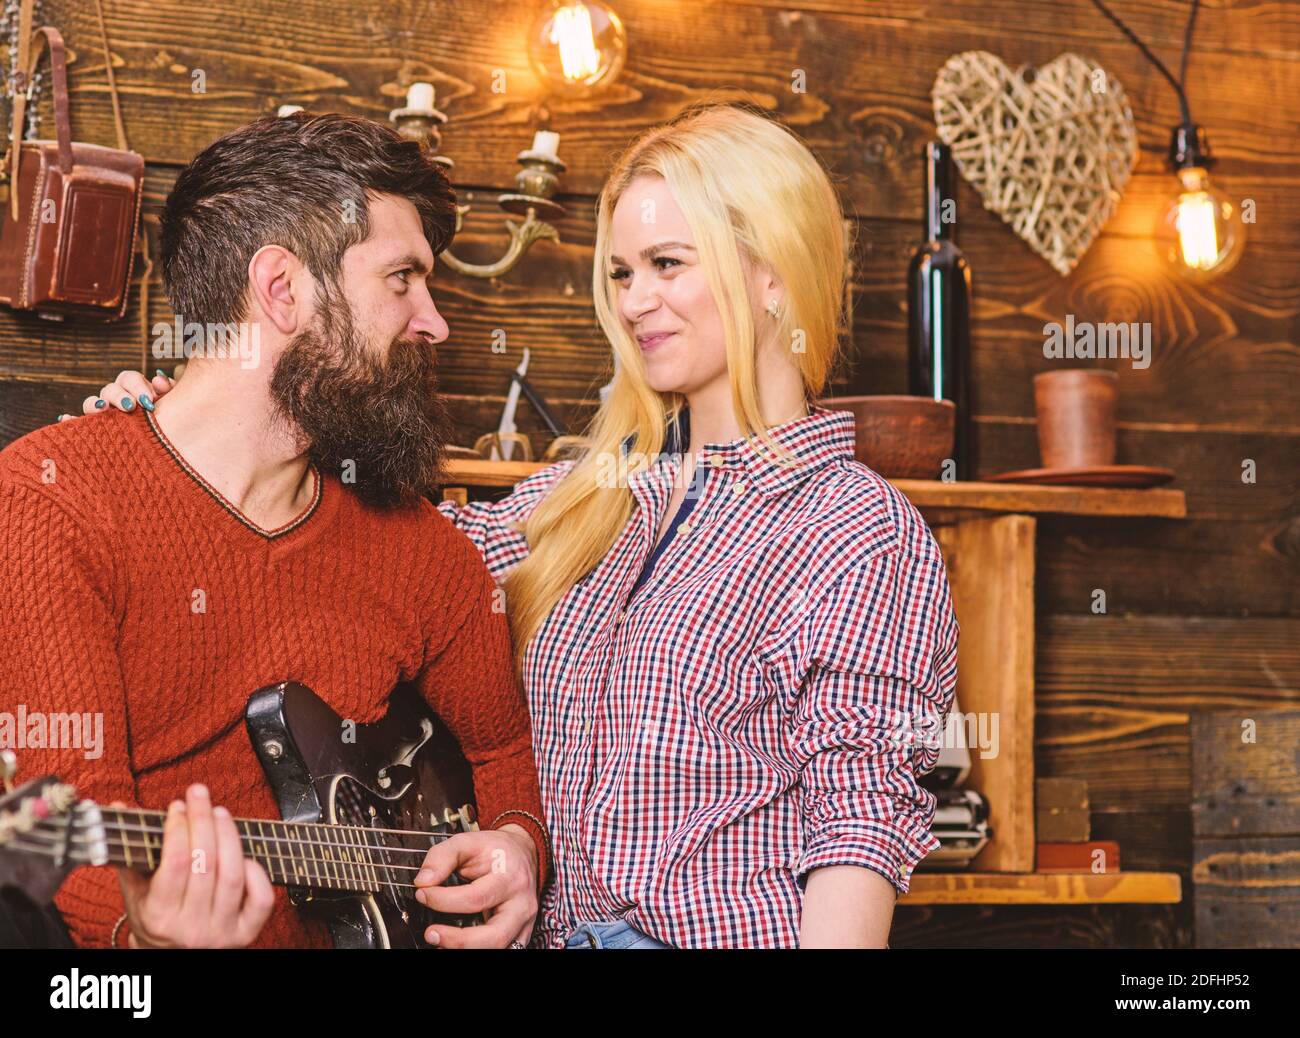 Romantic evening concept. Couple in love spend romantic evening in warm atmosphere. Couple in wooden vintage interior enjoy guitar music. Lady and man with beard on happy faces hugs and plays guitar. Stock Photo